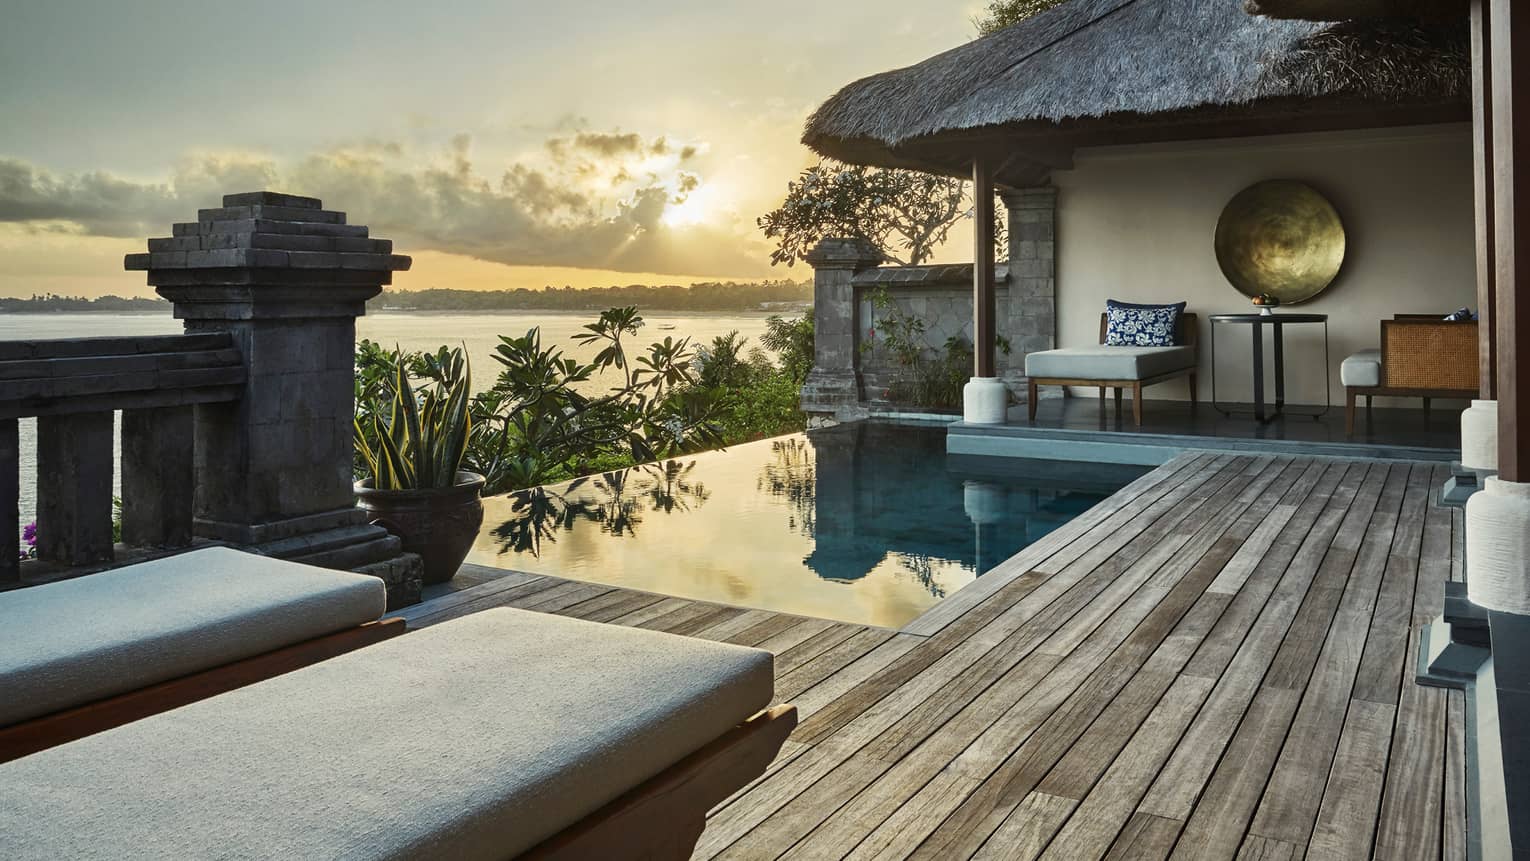 Ocean sunset reflecting on private villa swimming pool, palm trees, thatched roof, lounge chairs